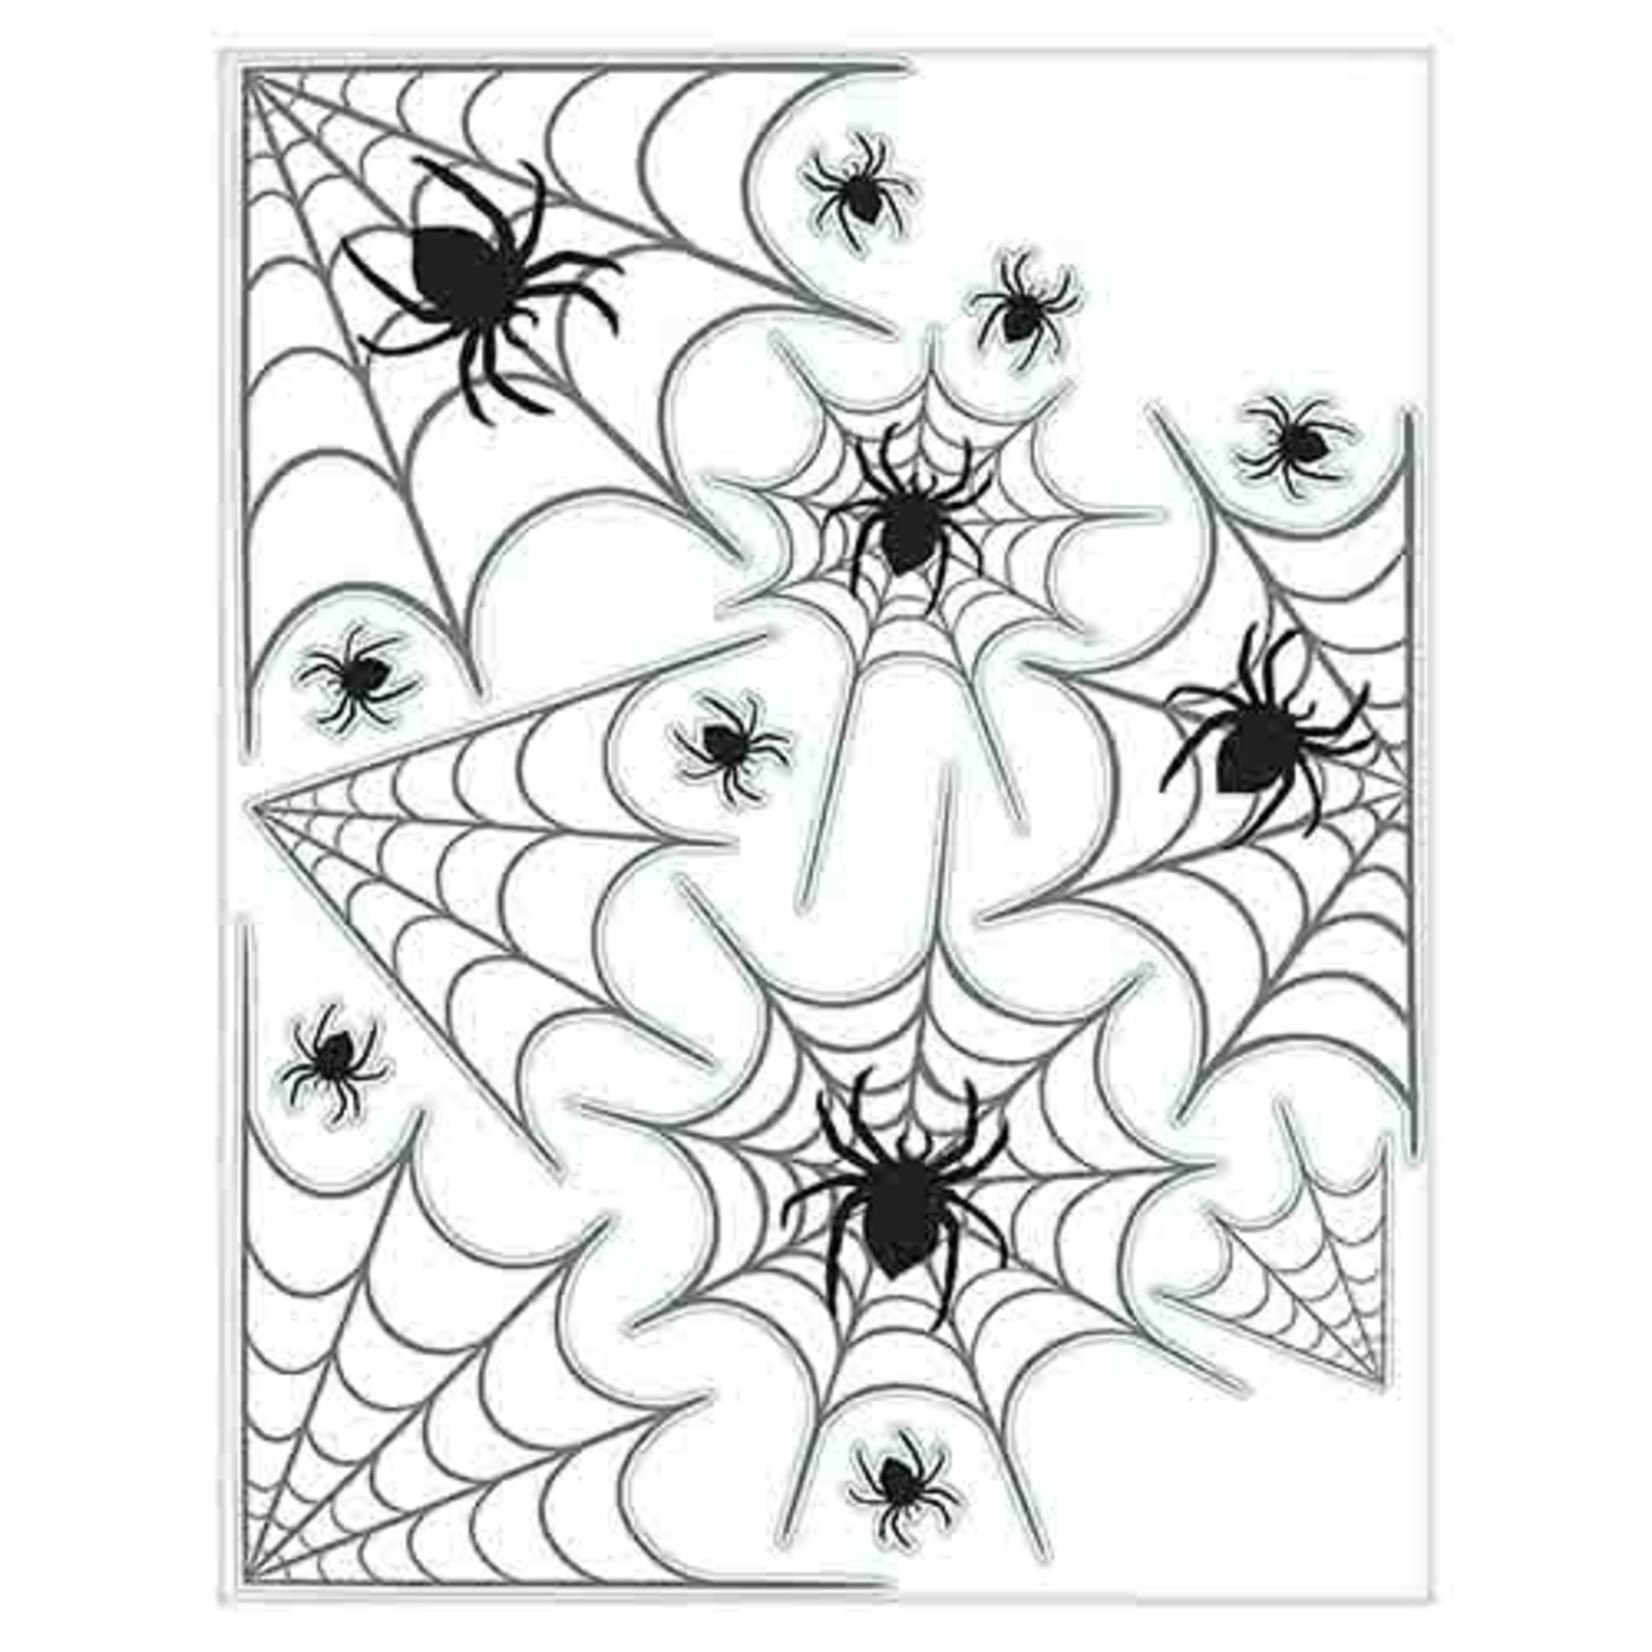 Amscan Halloween Spider Web Window Clings - 14ct.